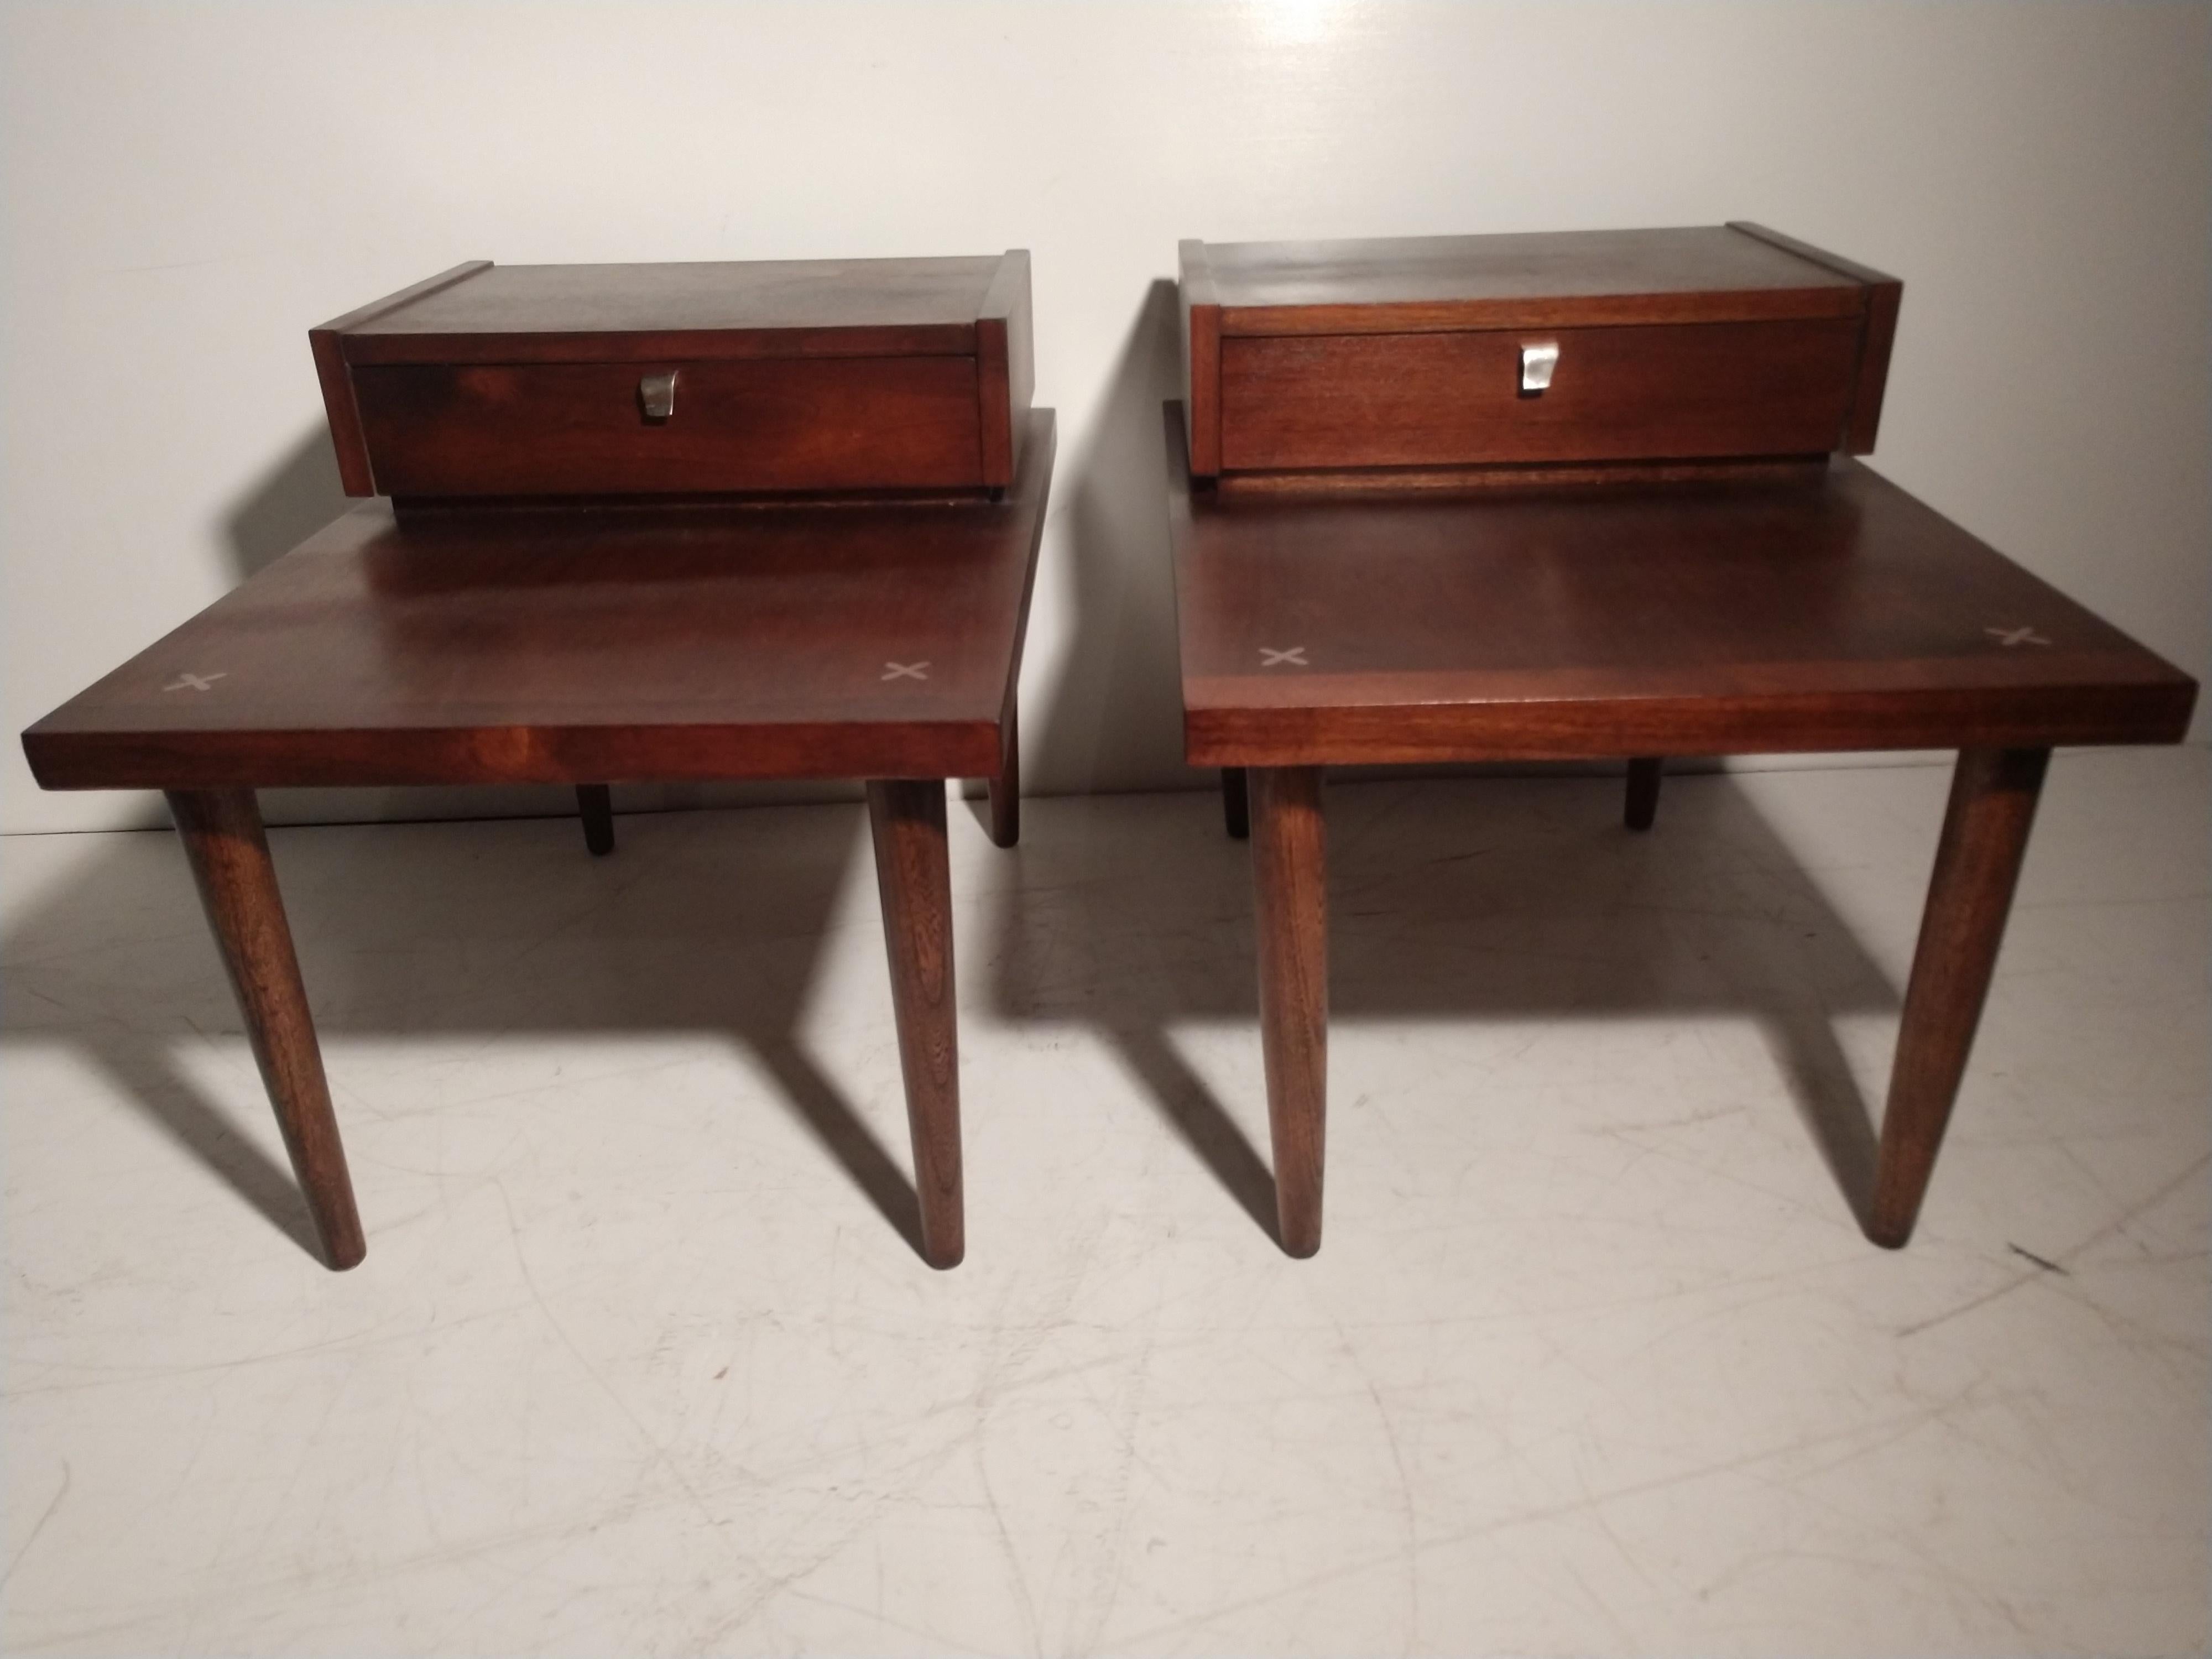 Mid-20th Century Pair of Mid-Century Modern Mahogany End Tables by Merton Gershun For Sale